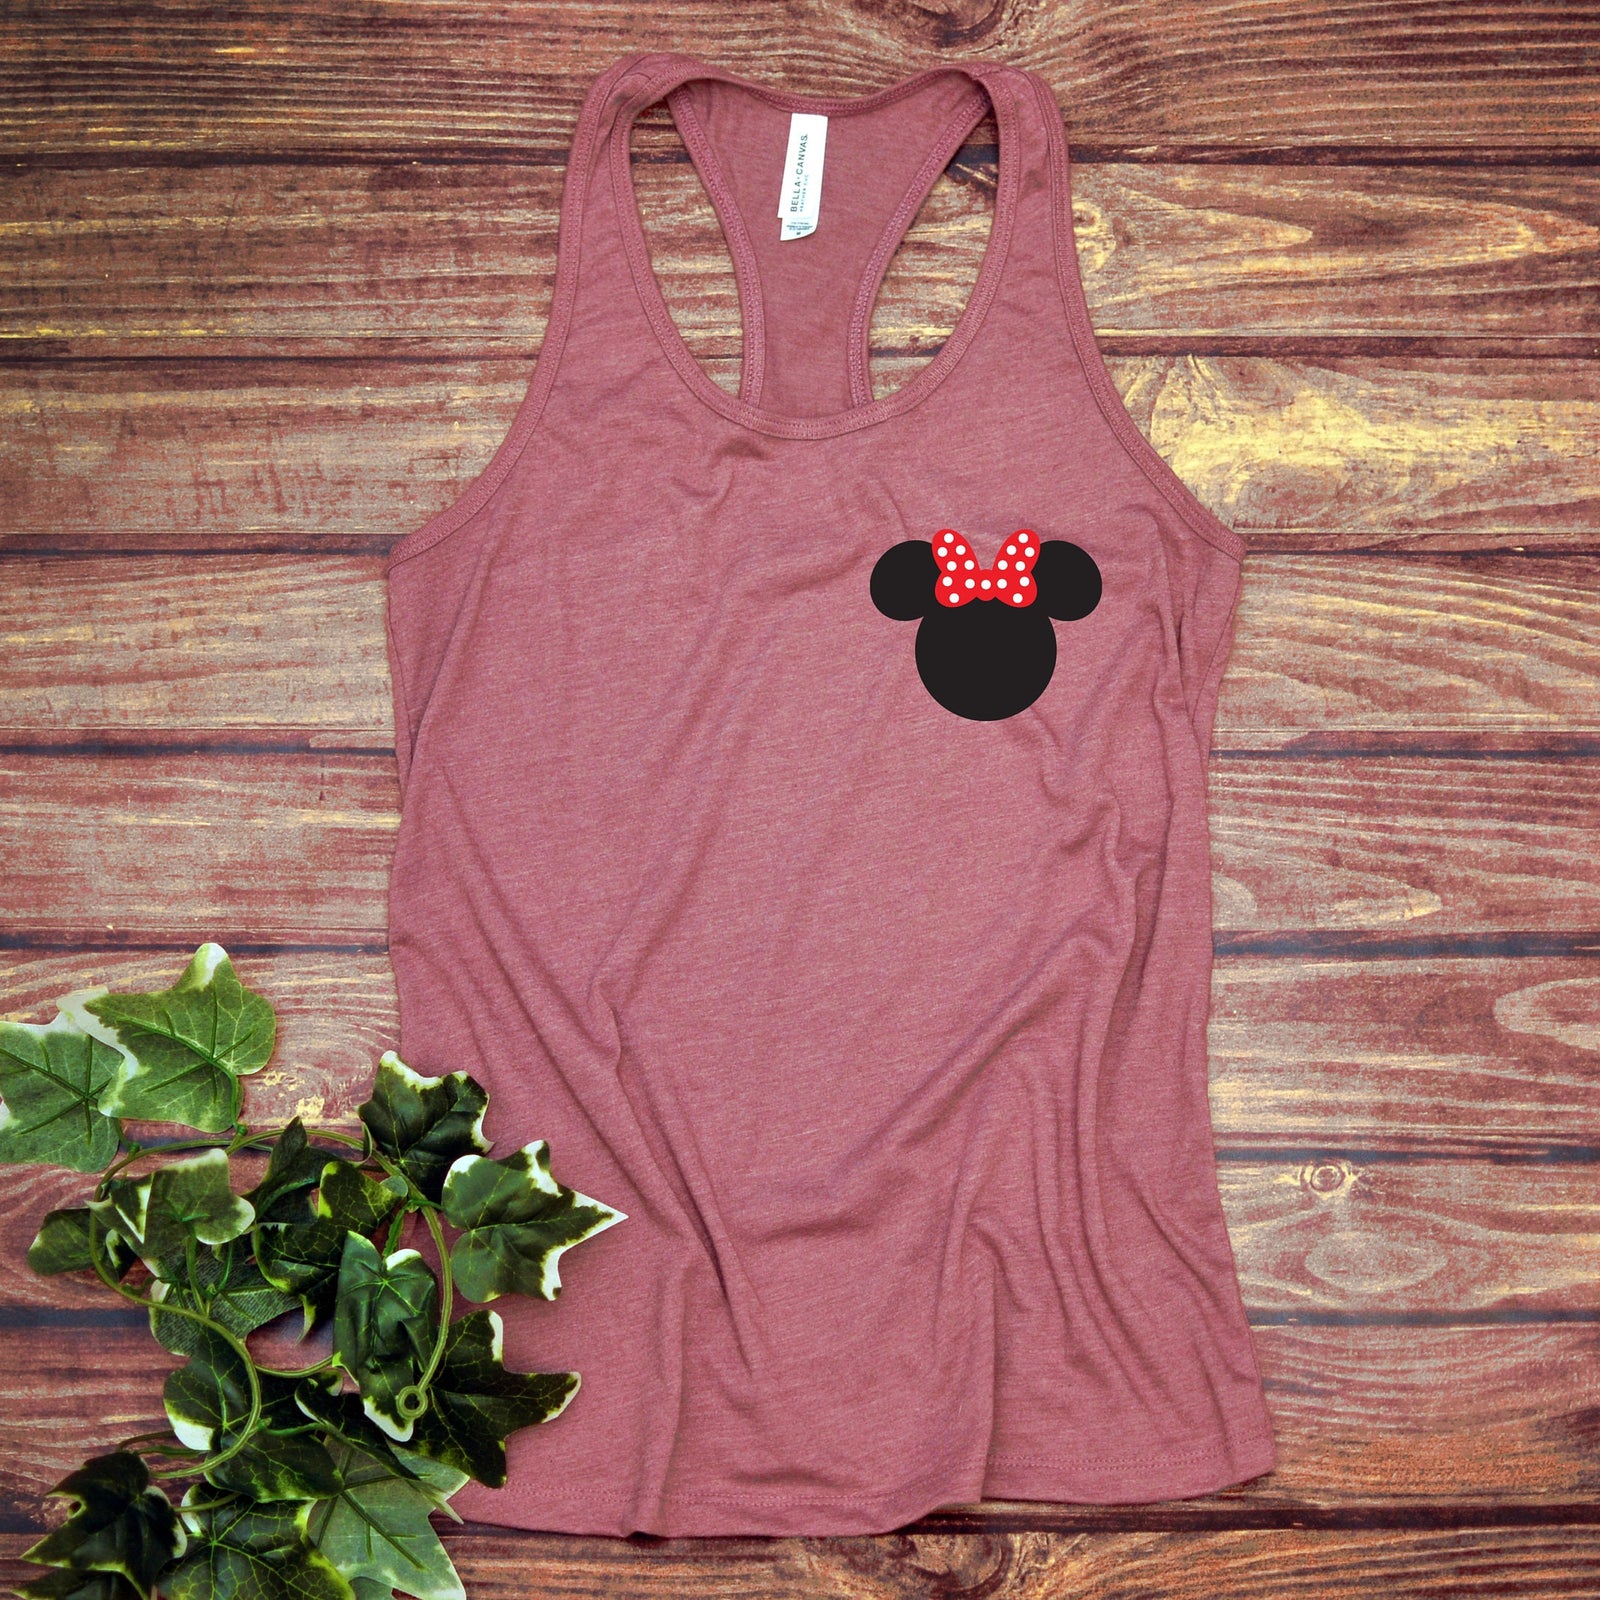 Pocket Size Minnie Mouse Ladies Racer Back Tank Top- Polka Dot Bow - Small Left Chest Logo